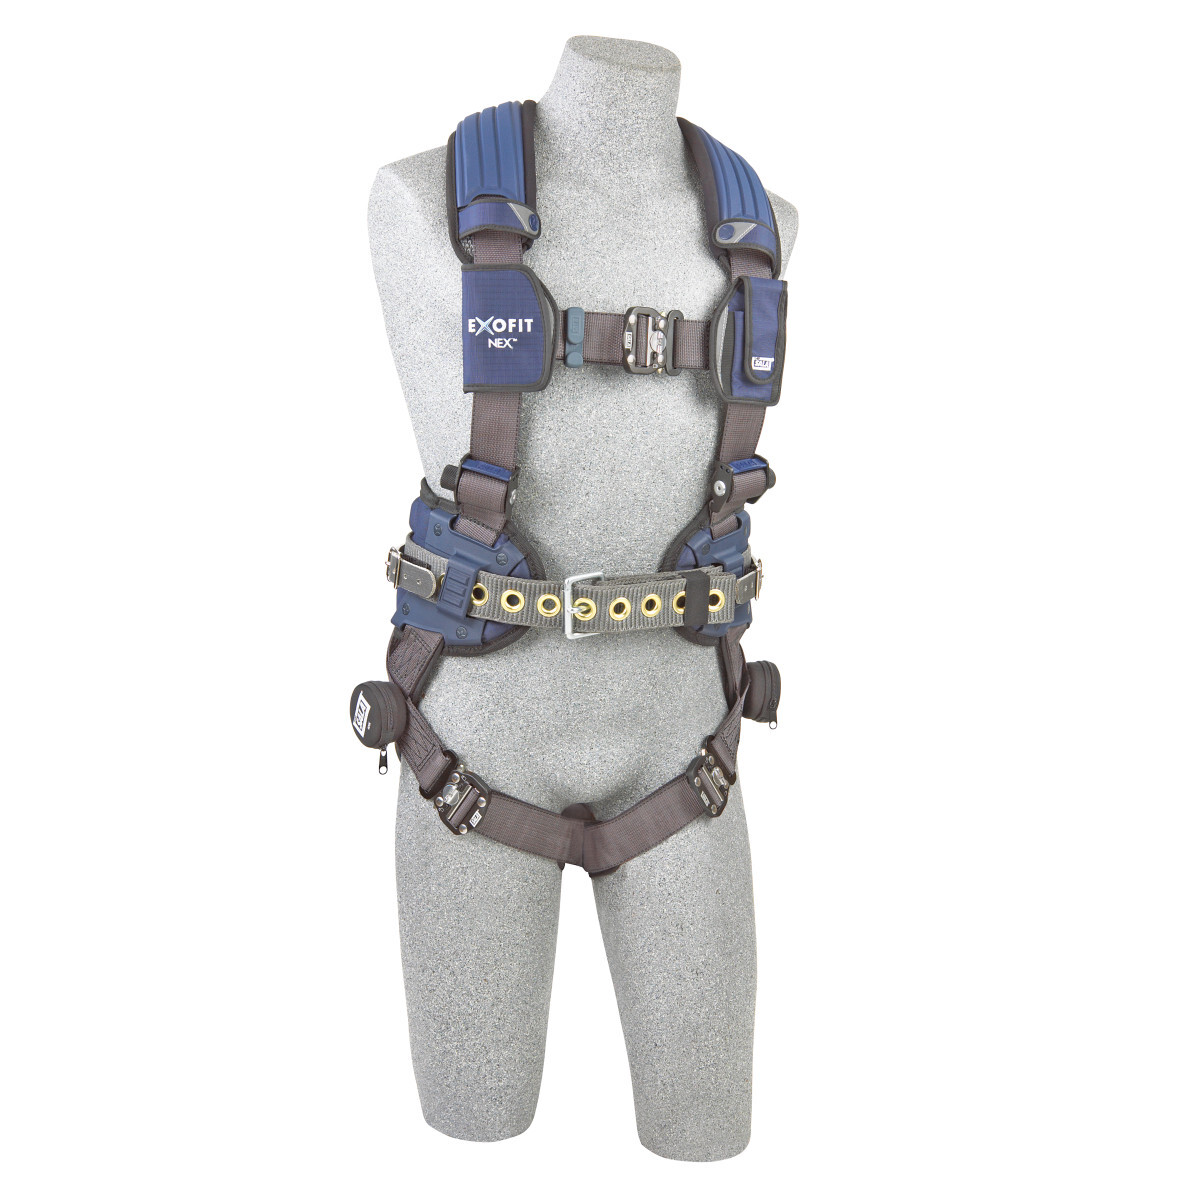 3M™ DBI-SALA® Large ExoFit NEX™ Full Body/Vest Style Harness With Tech-Lite™ Aluminum Back D-Ring, Miner'S Belt With Pad And Sid